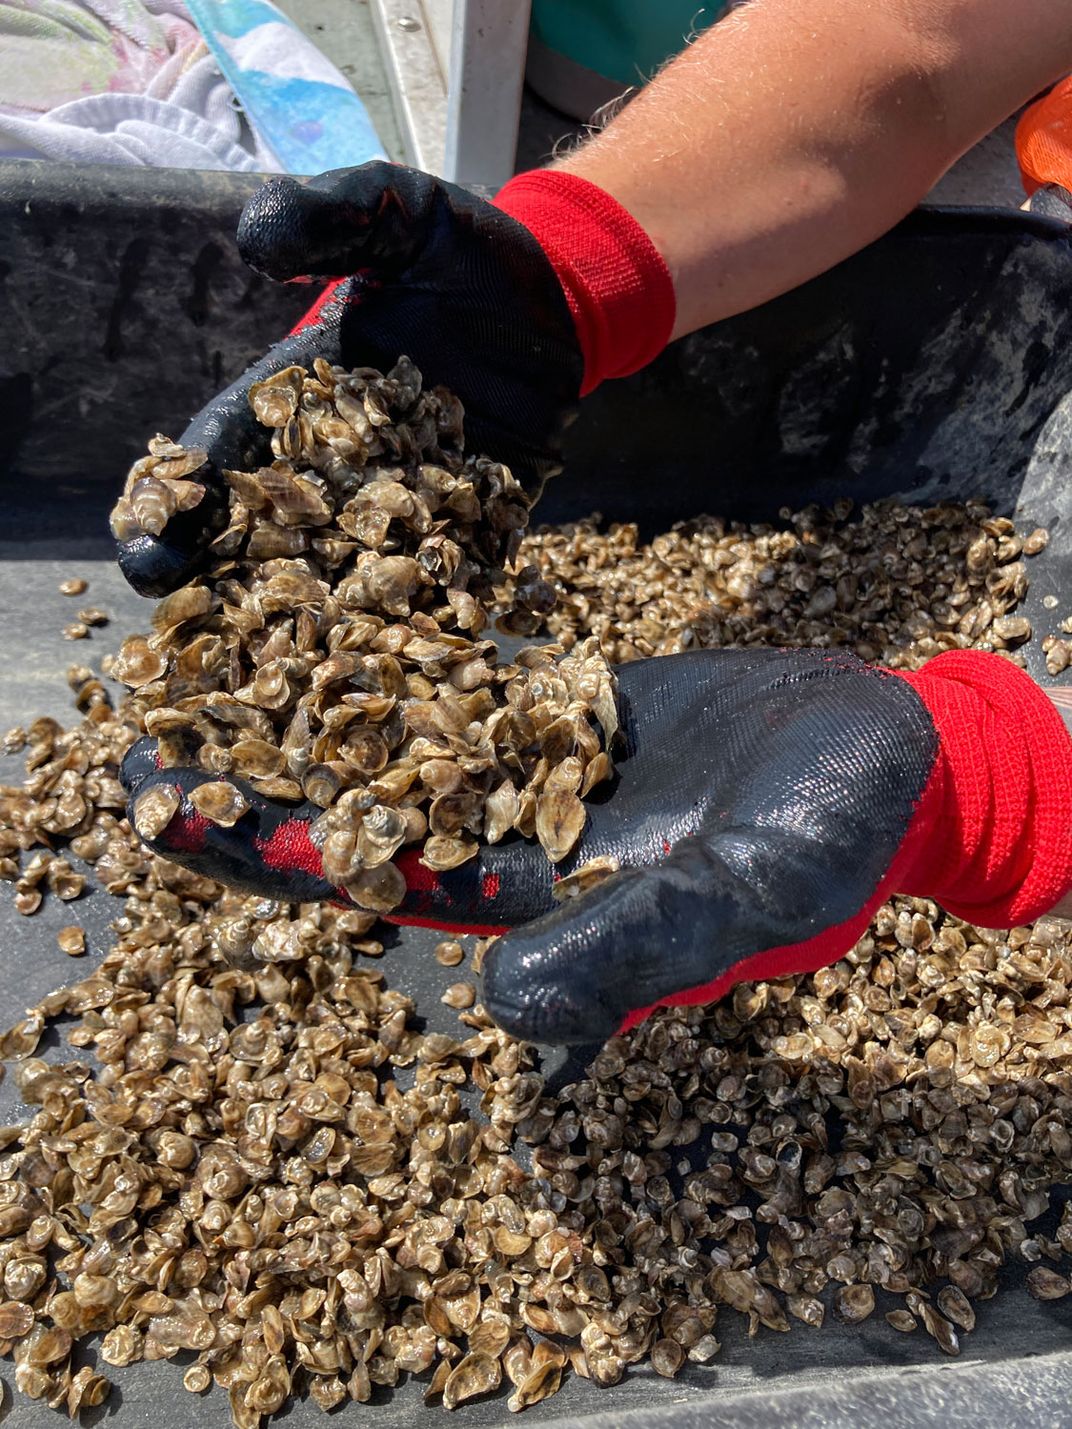 North Carolina's Oyster Trail Aims to Give the Farmed Shellfish Industry a Boost